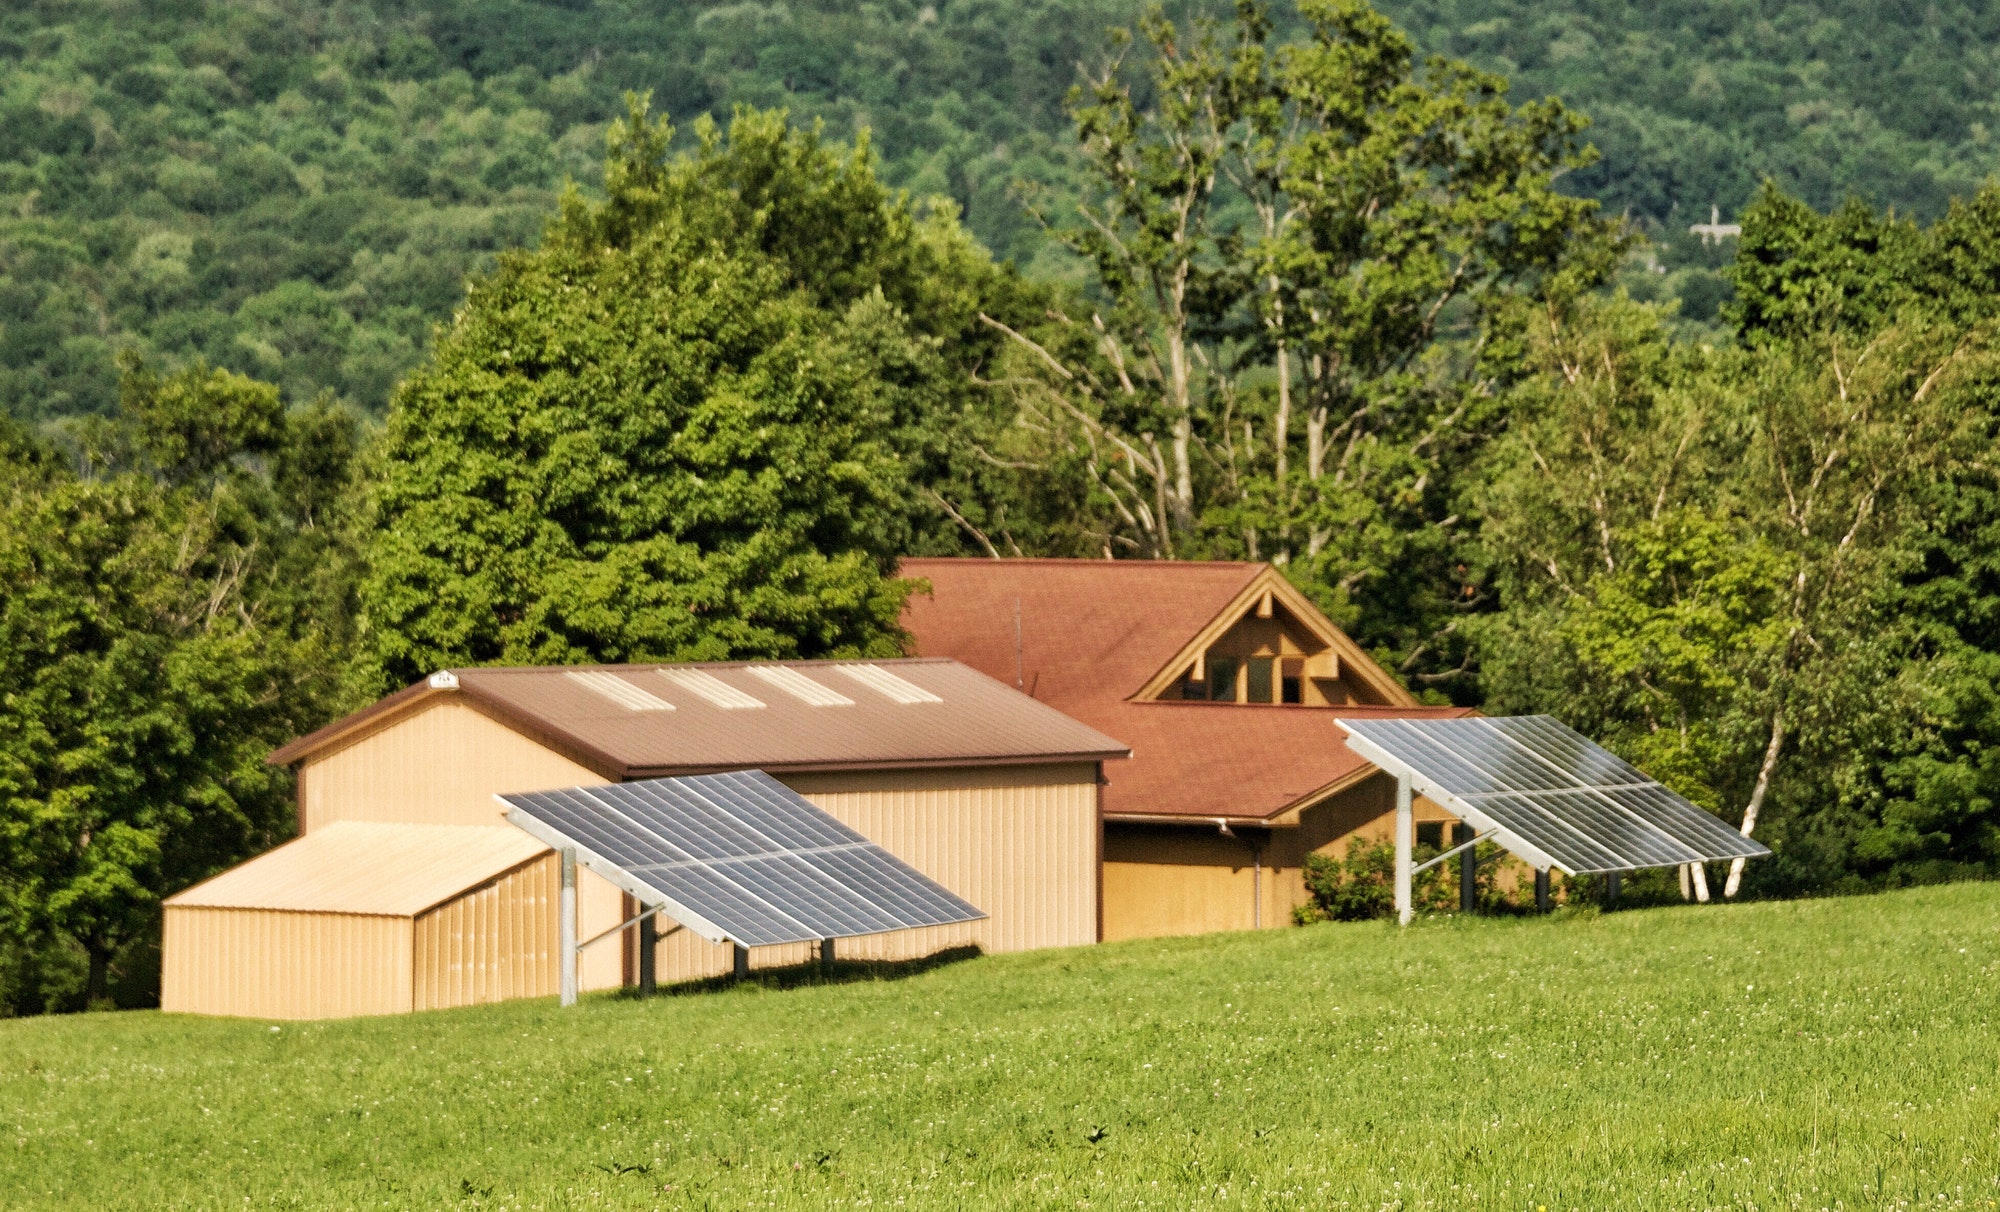 Solar energy panels on the rooftop of a country home near a forest